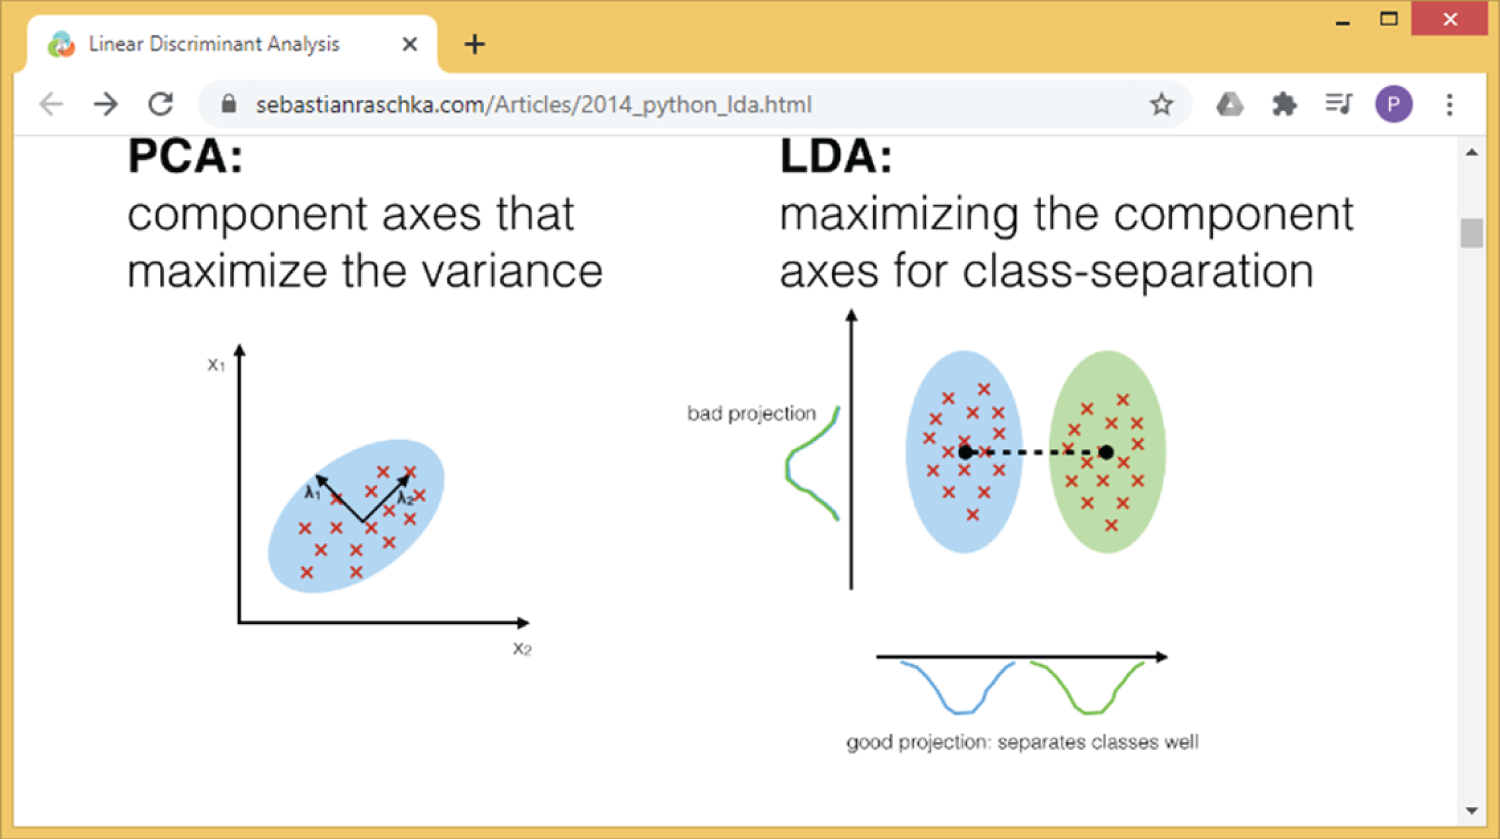 Snapshot of an article about linear discriminant analysis, which compares PCA and LDA.